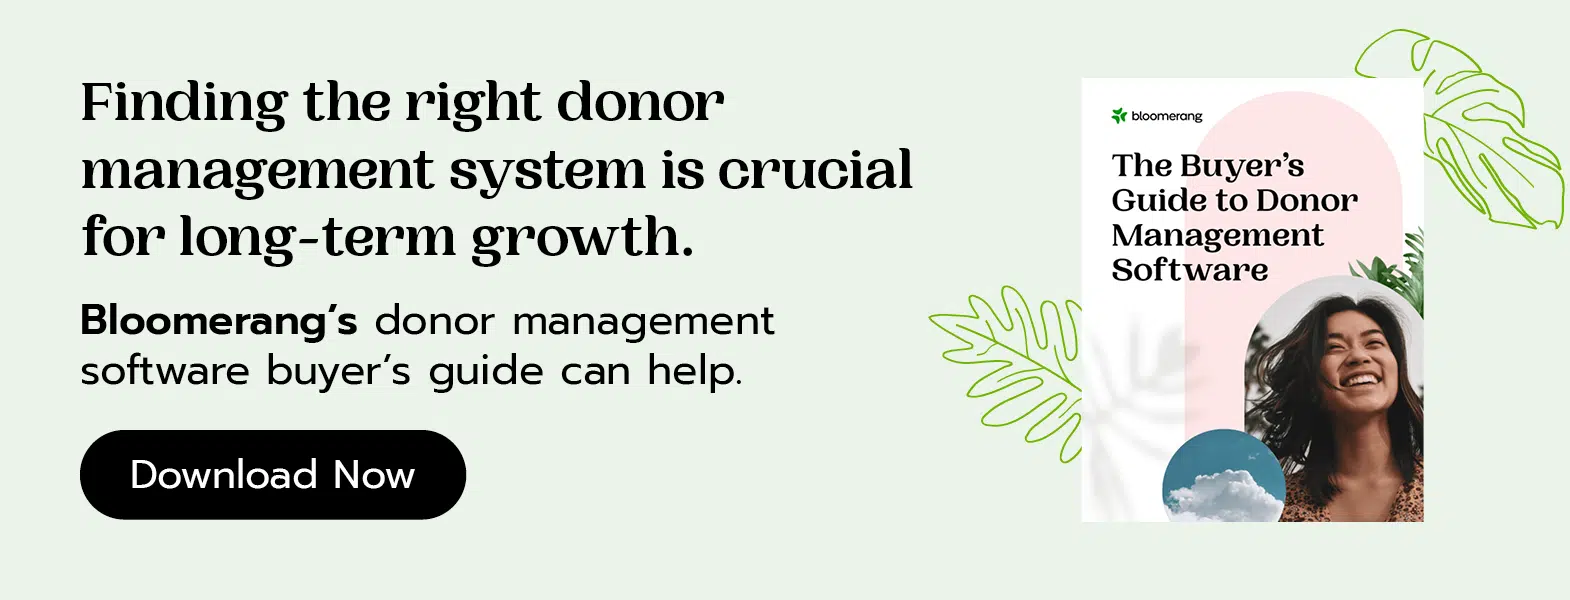 Finding the right donor management system is crucial for long-term growth. Bloomerang’s donor management software buyer’s guide can help. Download it here.